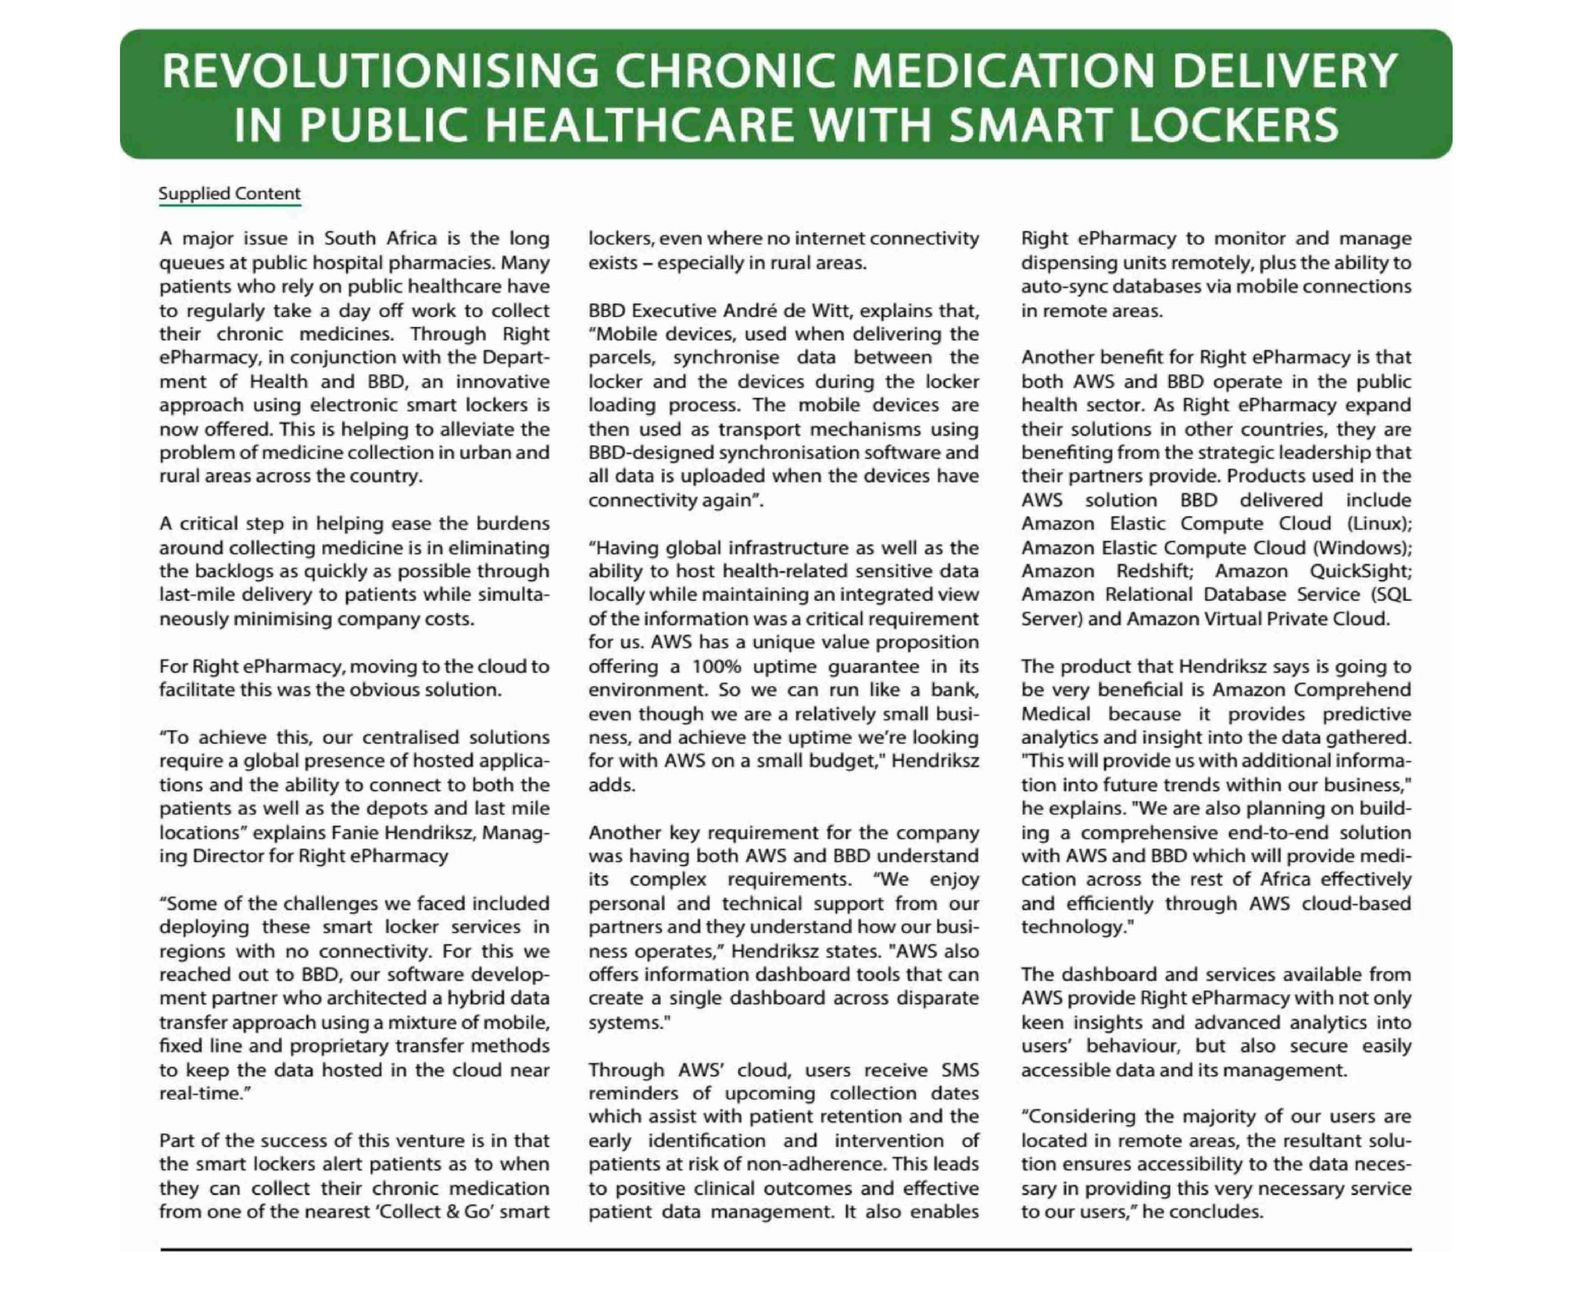 Revolutionising chronic medication delivery in public healthcare with smart lockers